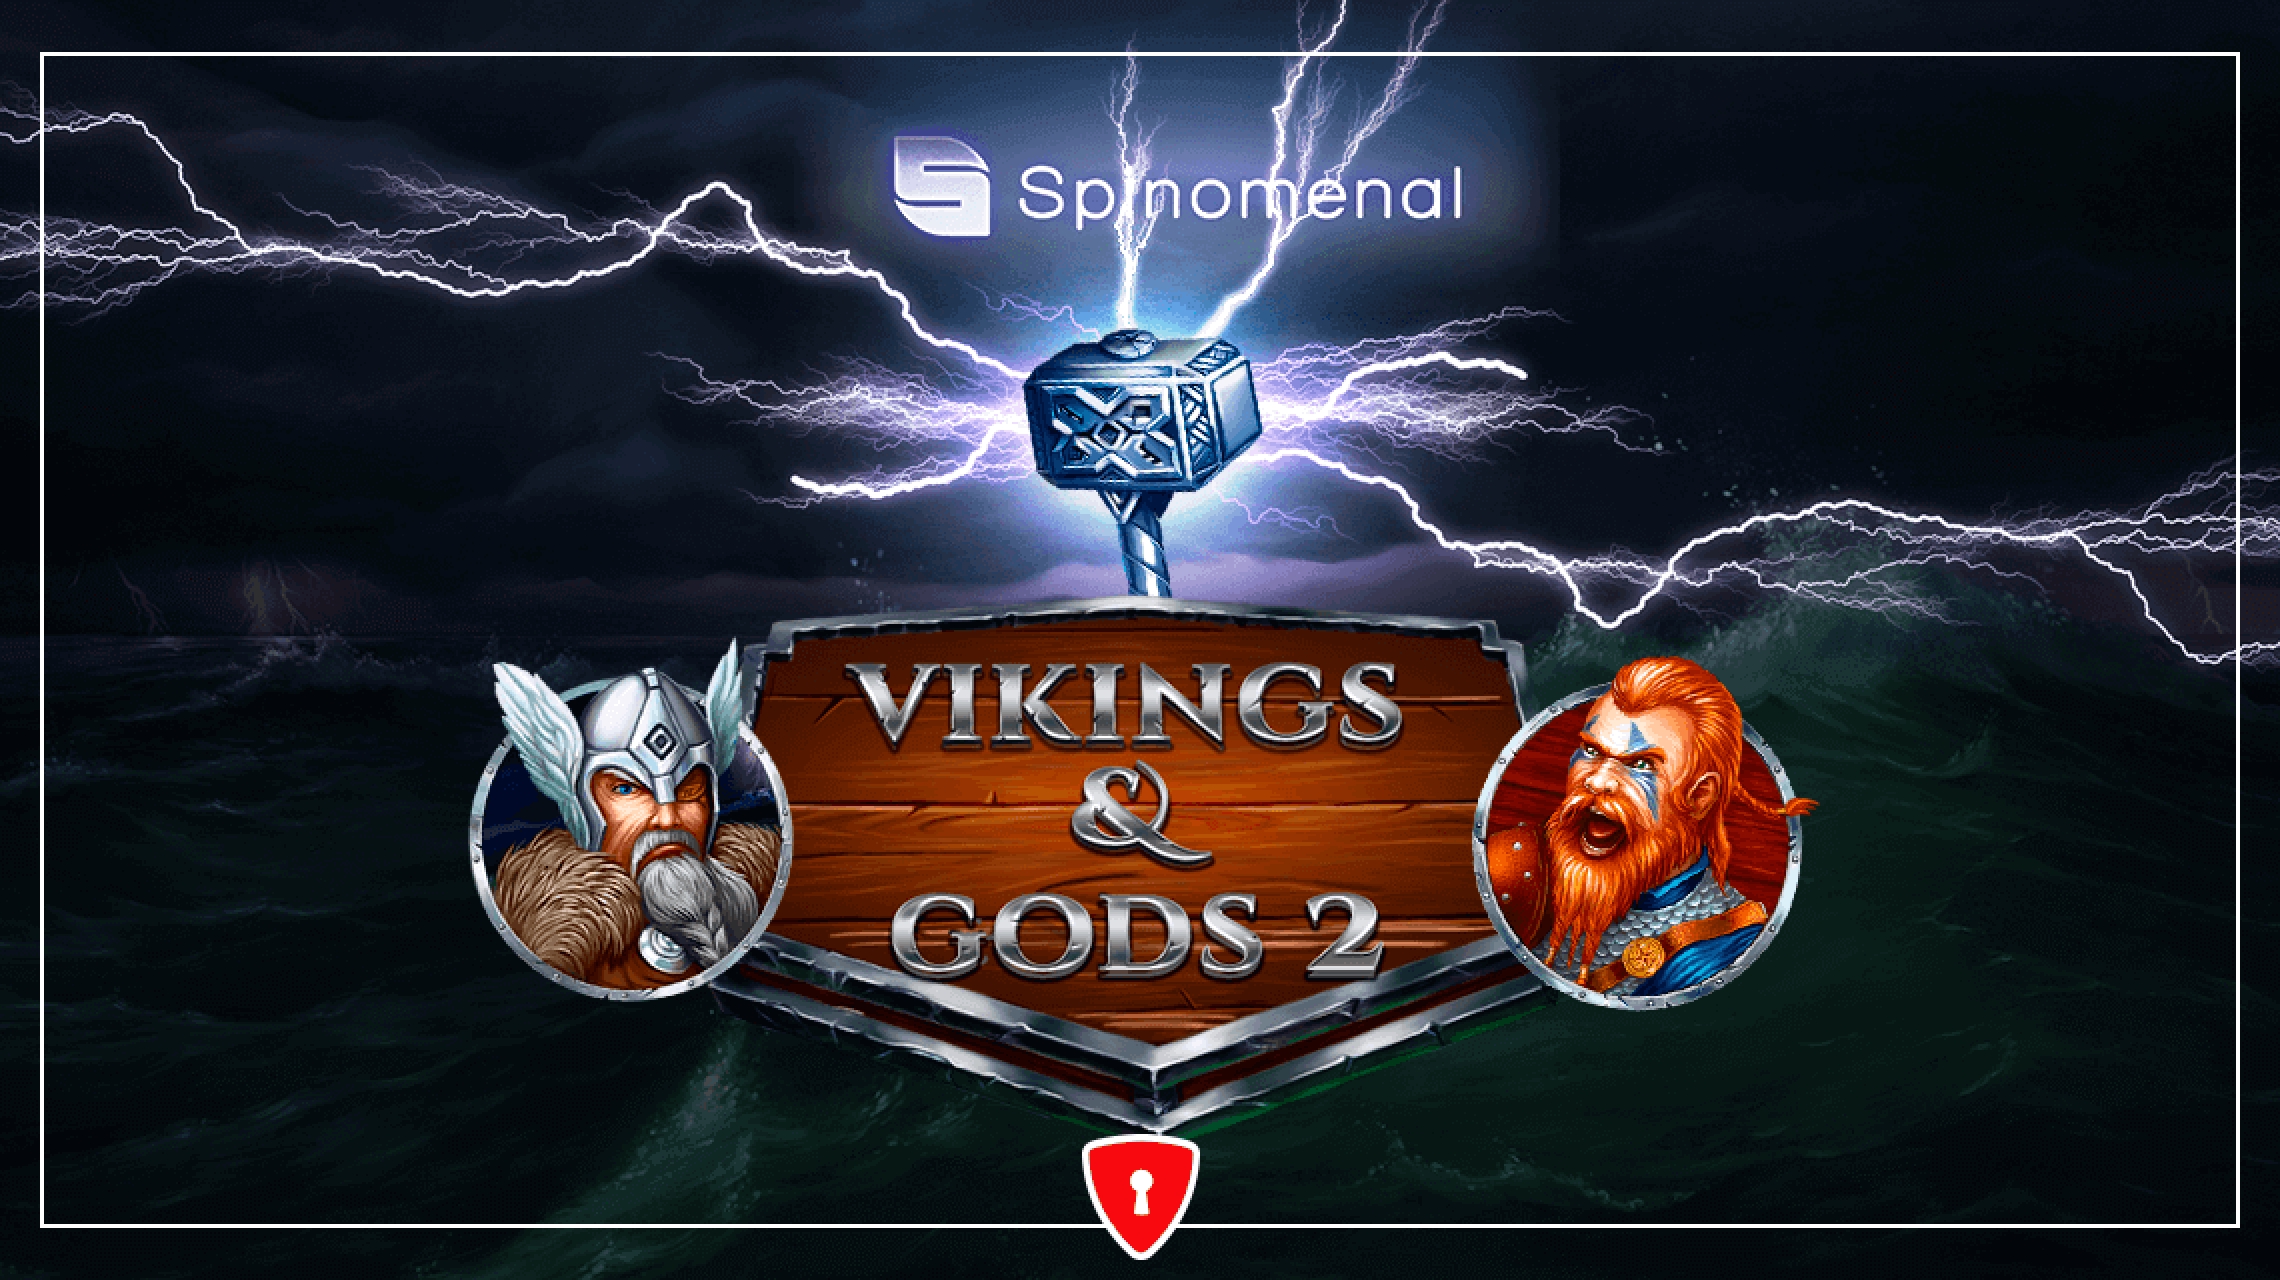 Vikings and Gods 2 15 Lines demo